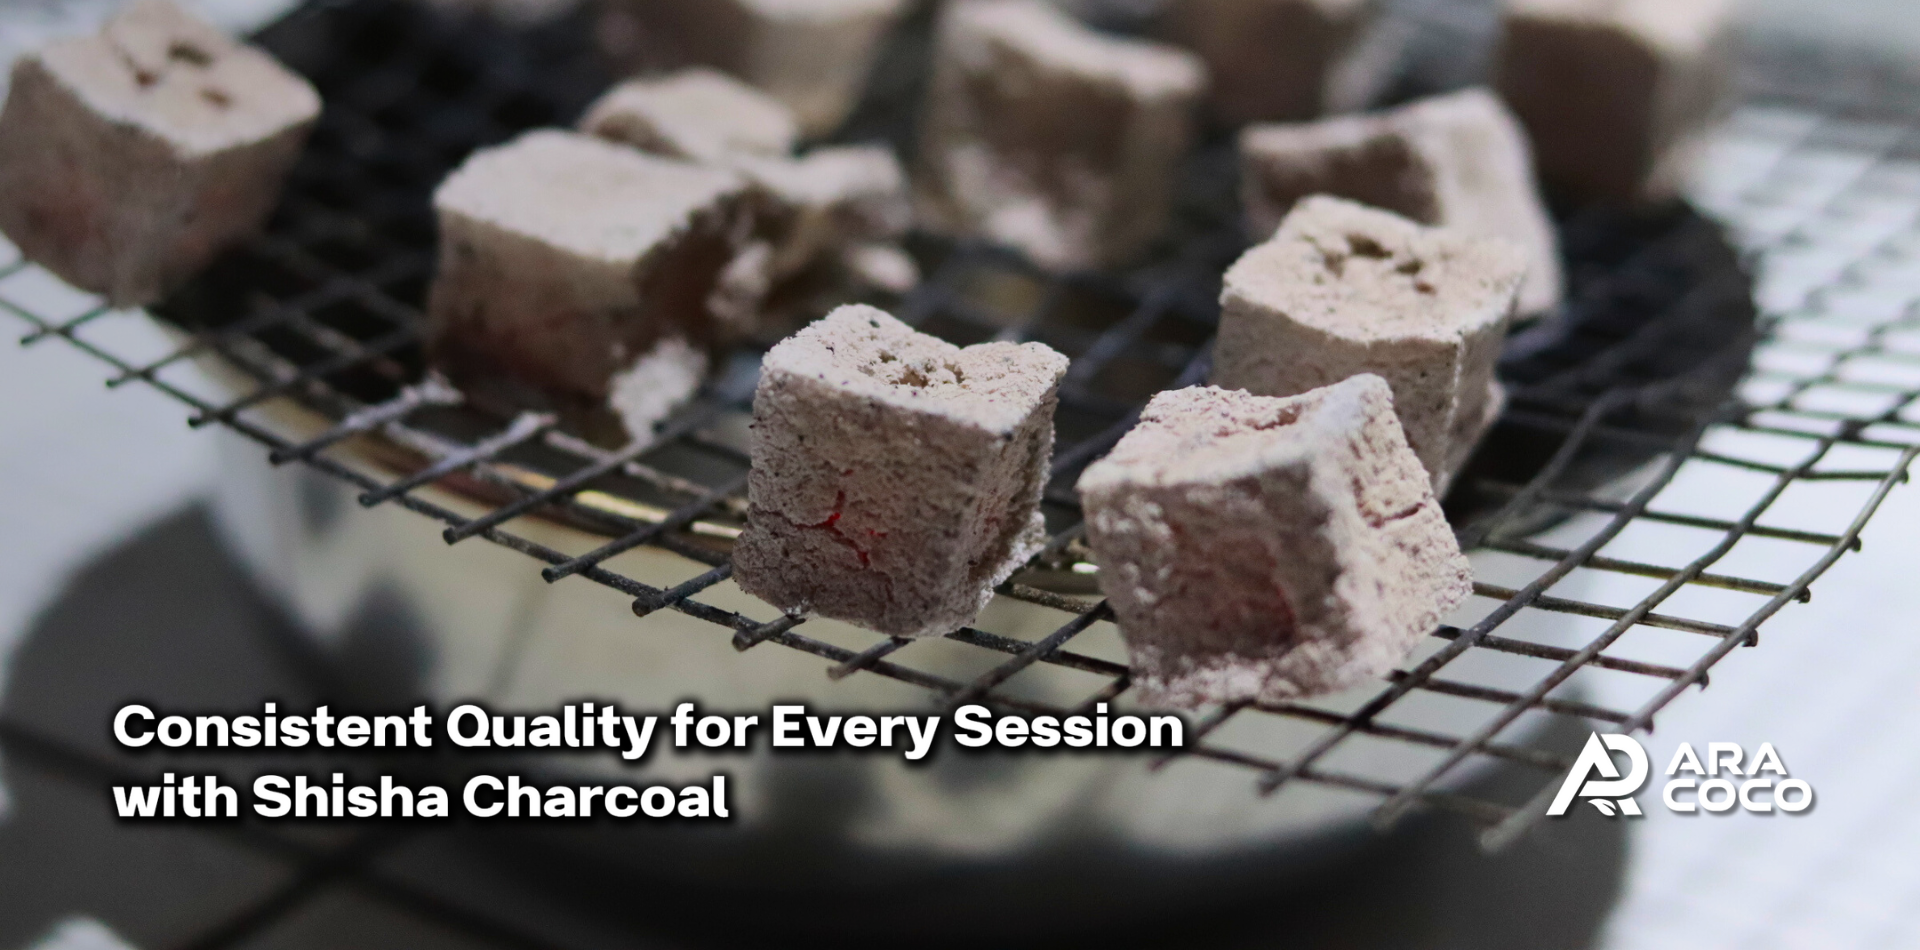 Consistent Quality for Every Session with Shisha Charcoal